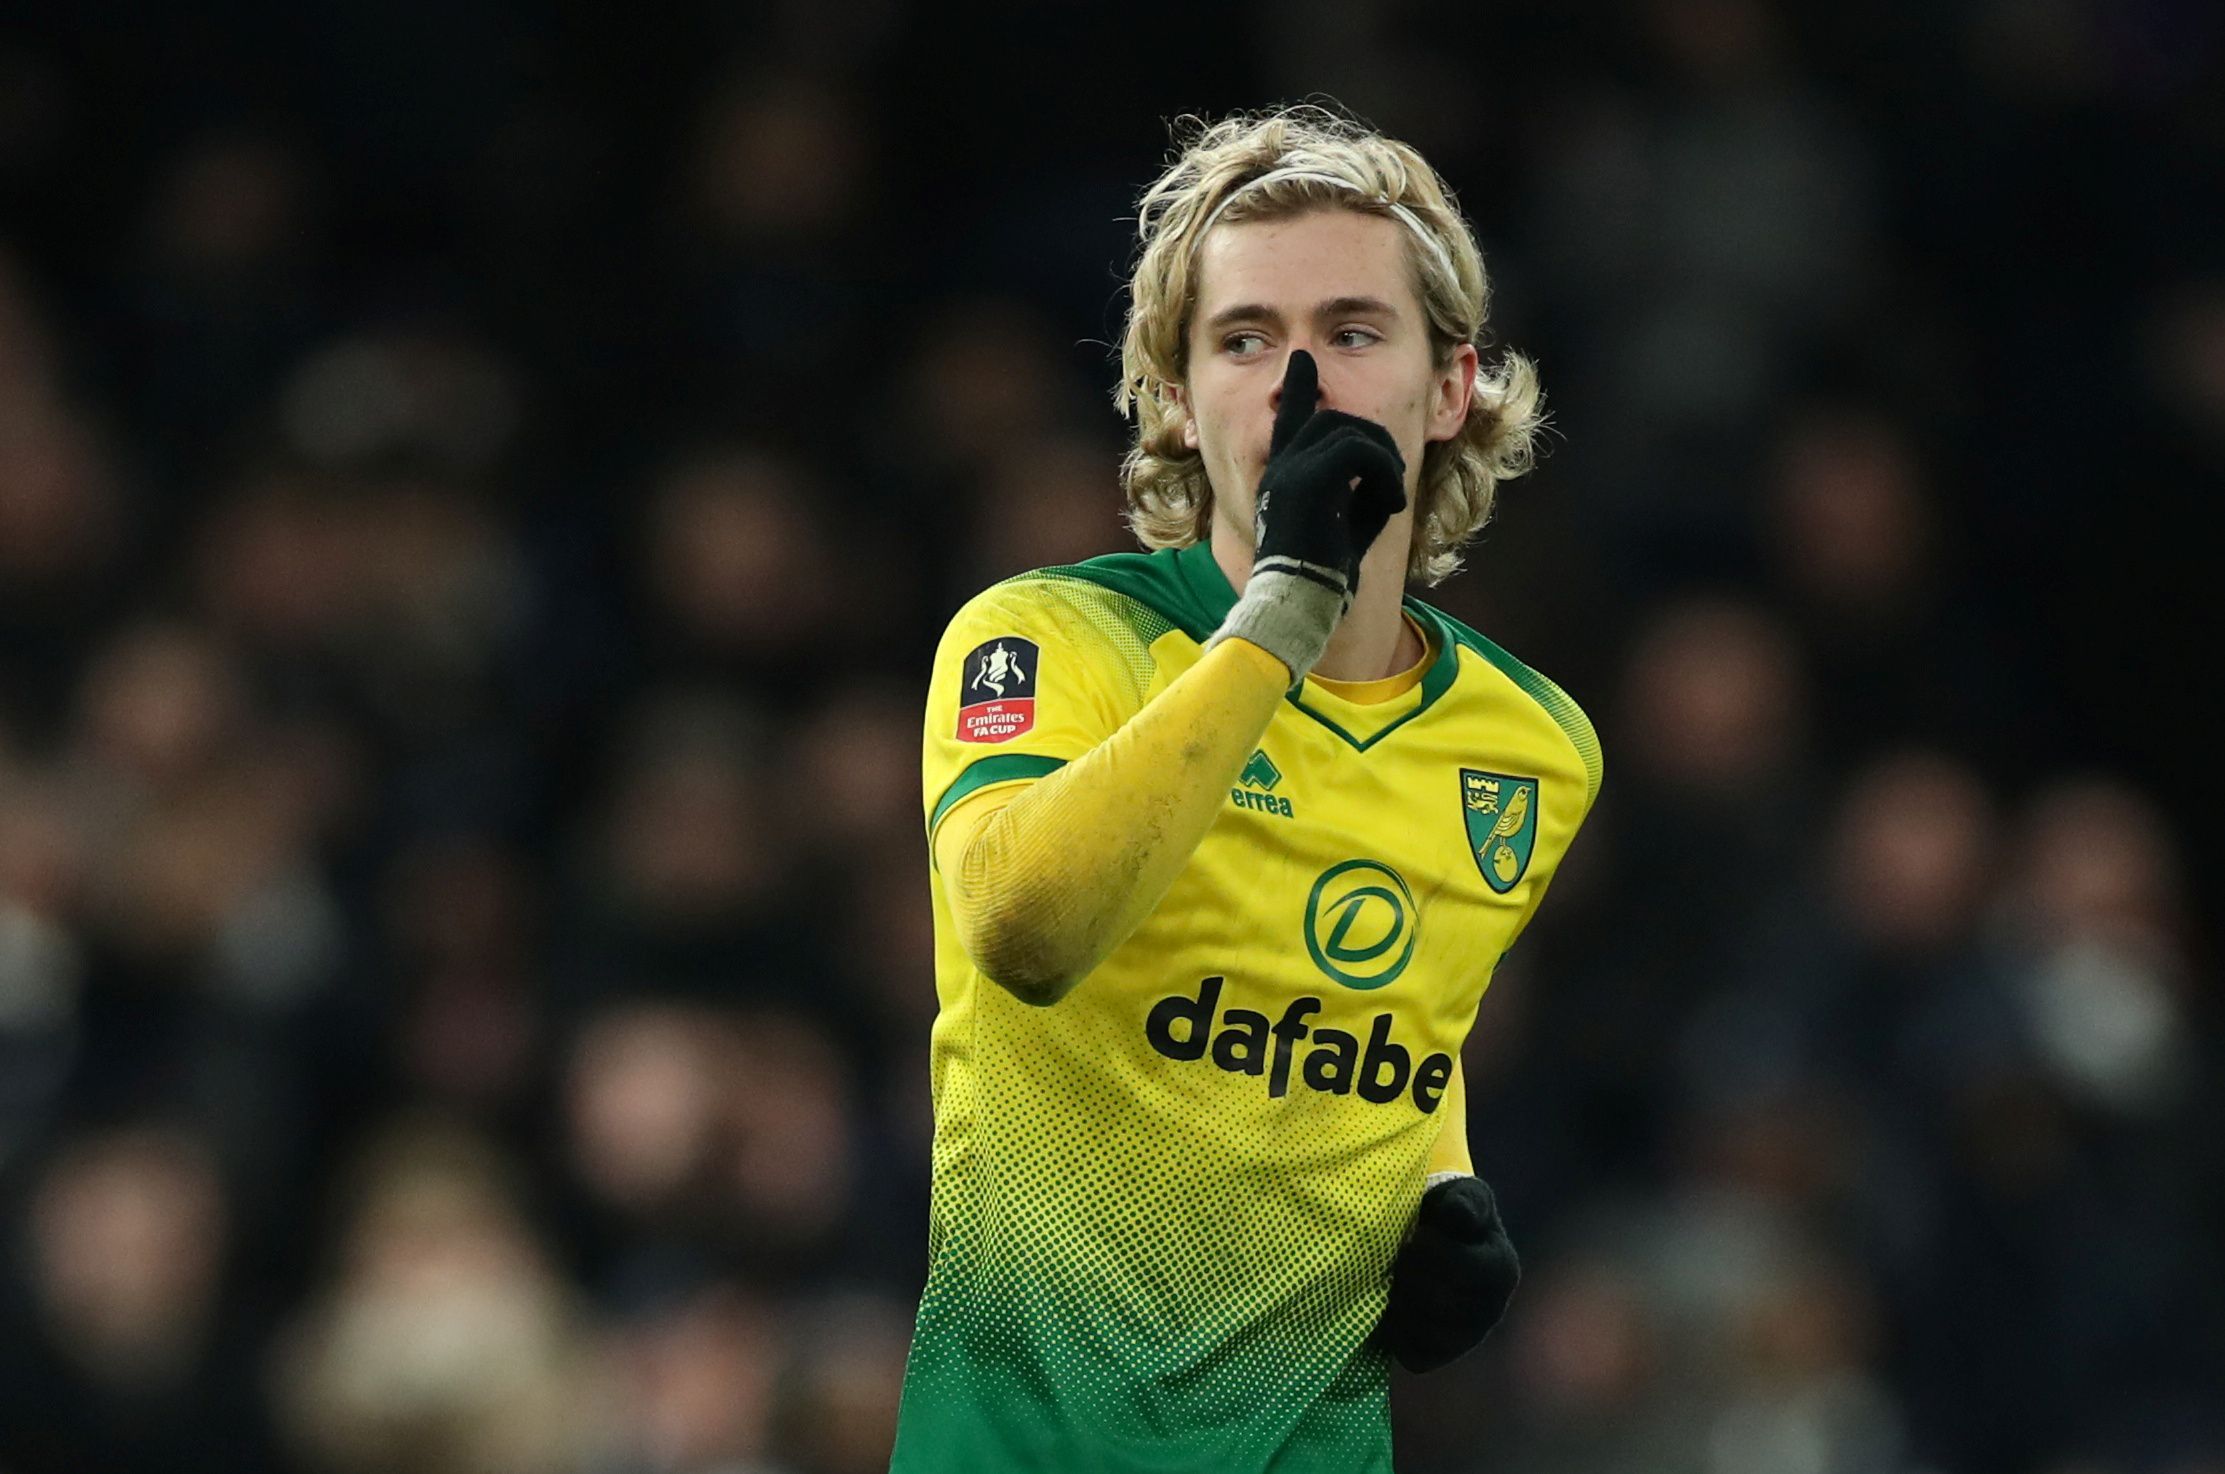 Soccer Football - FA Cup Fifth Round - Tottenham Hotspur v Norwich City - Tottenham Hotspur Stadium, London, Britain - March 4, 2020  Norwich City's Todd Cantwell celebrates after winning the penalty shootout  Action Images via Reuters/Peter Cziborra